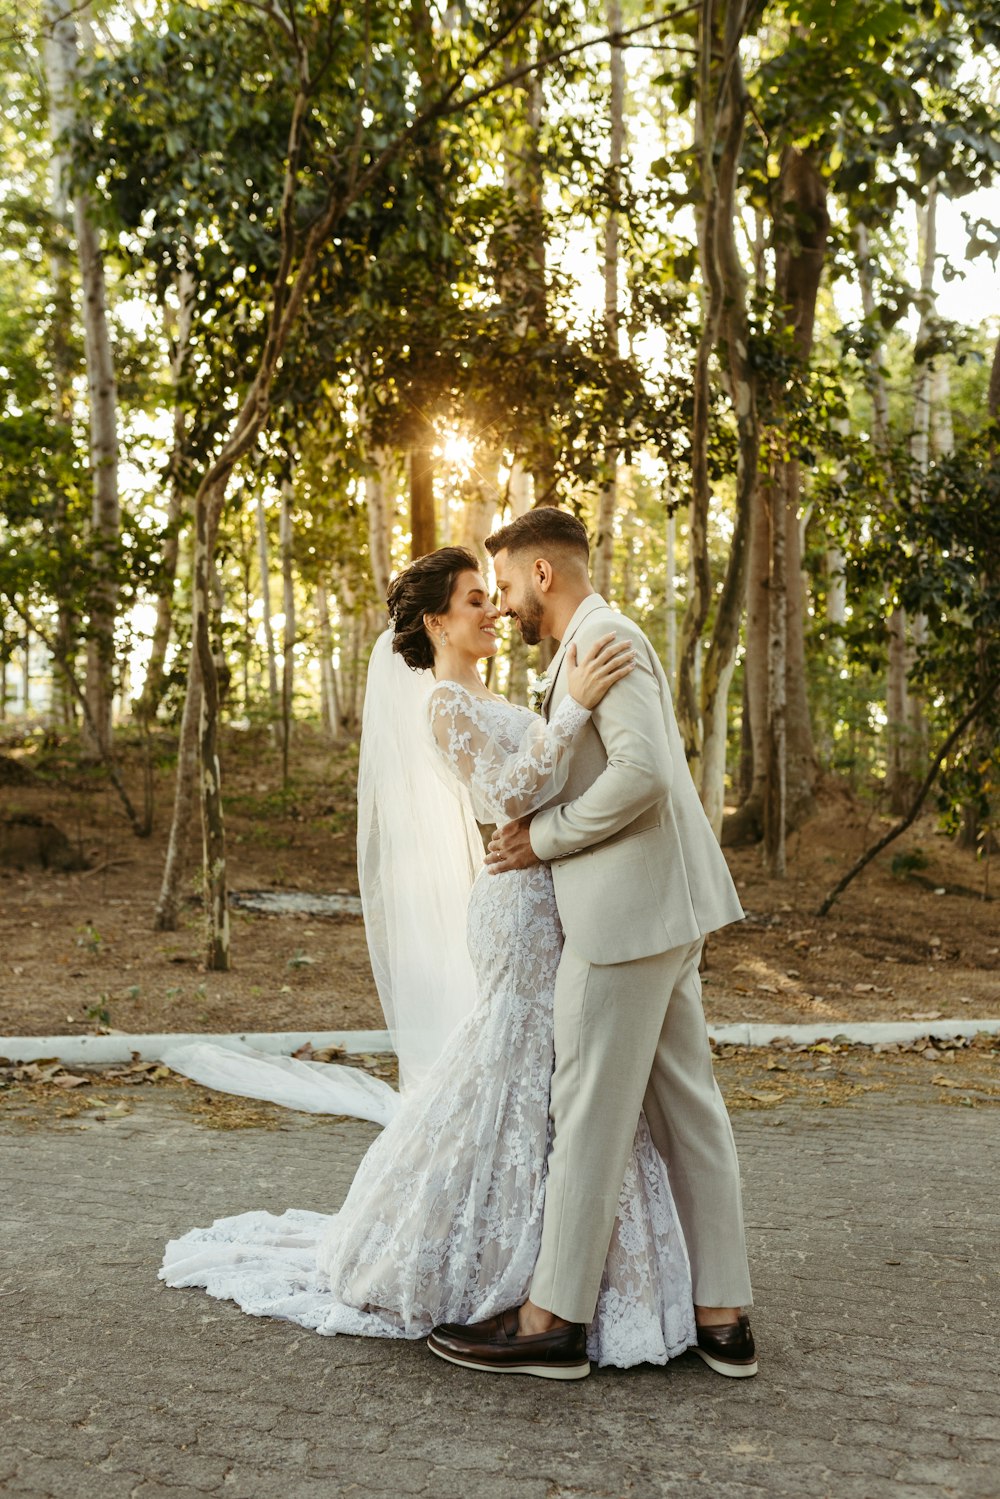 a bride and groom embracing in front of trees